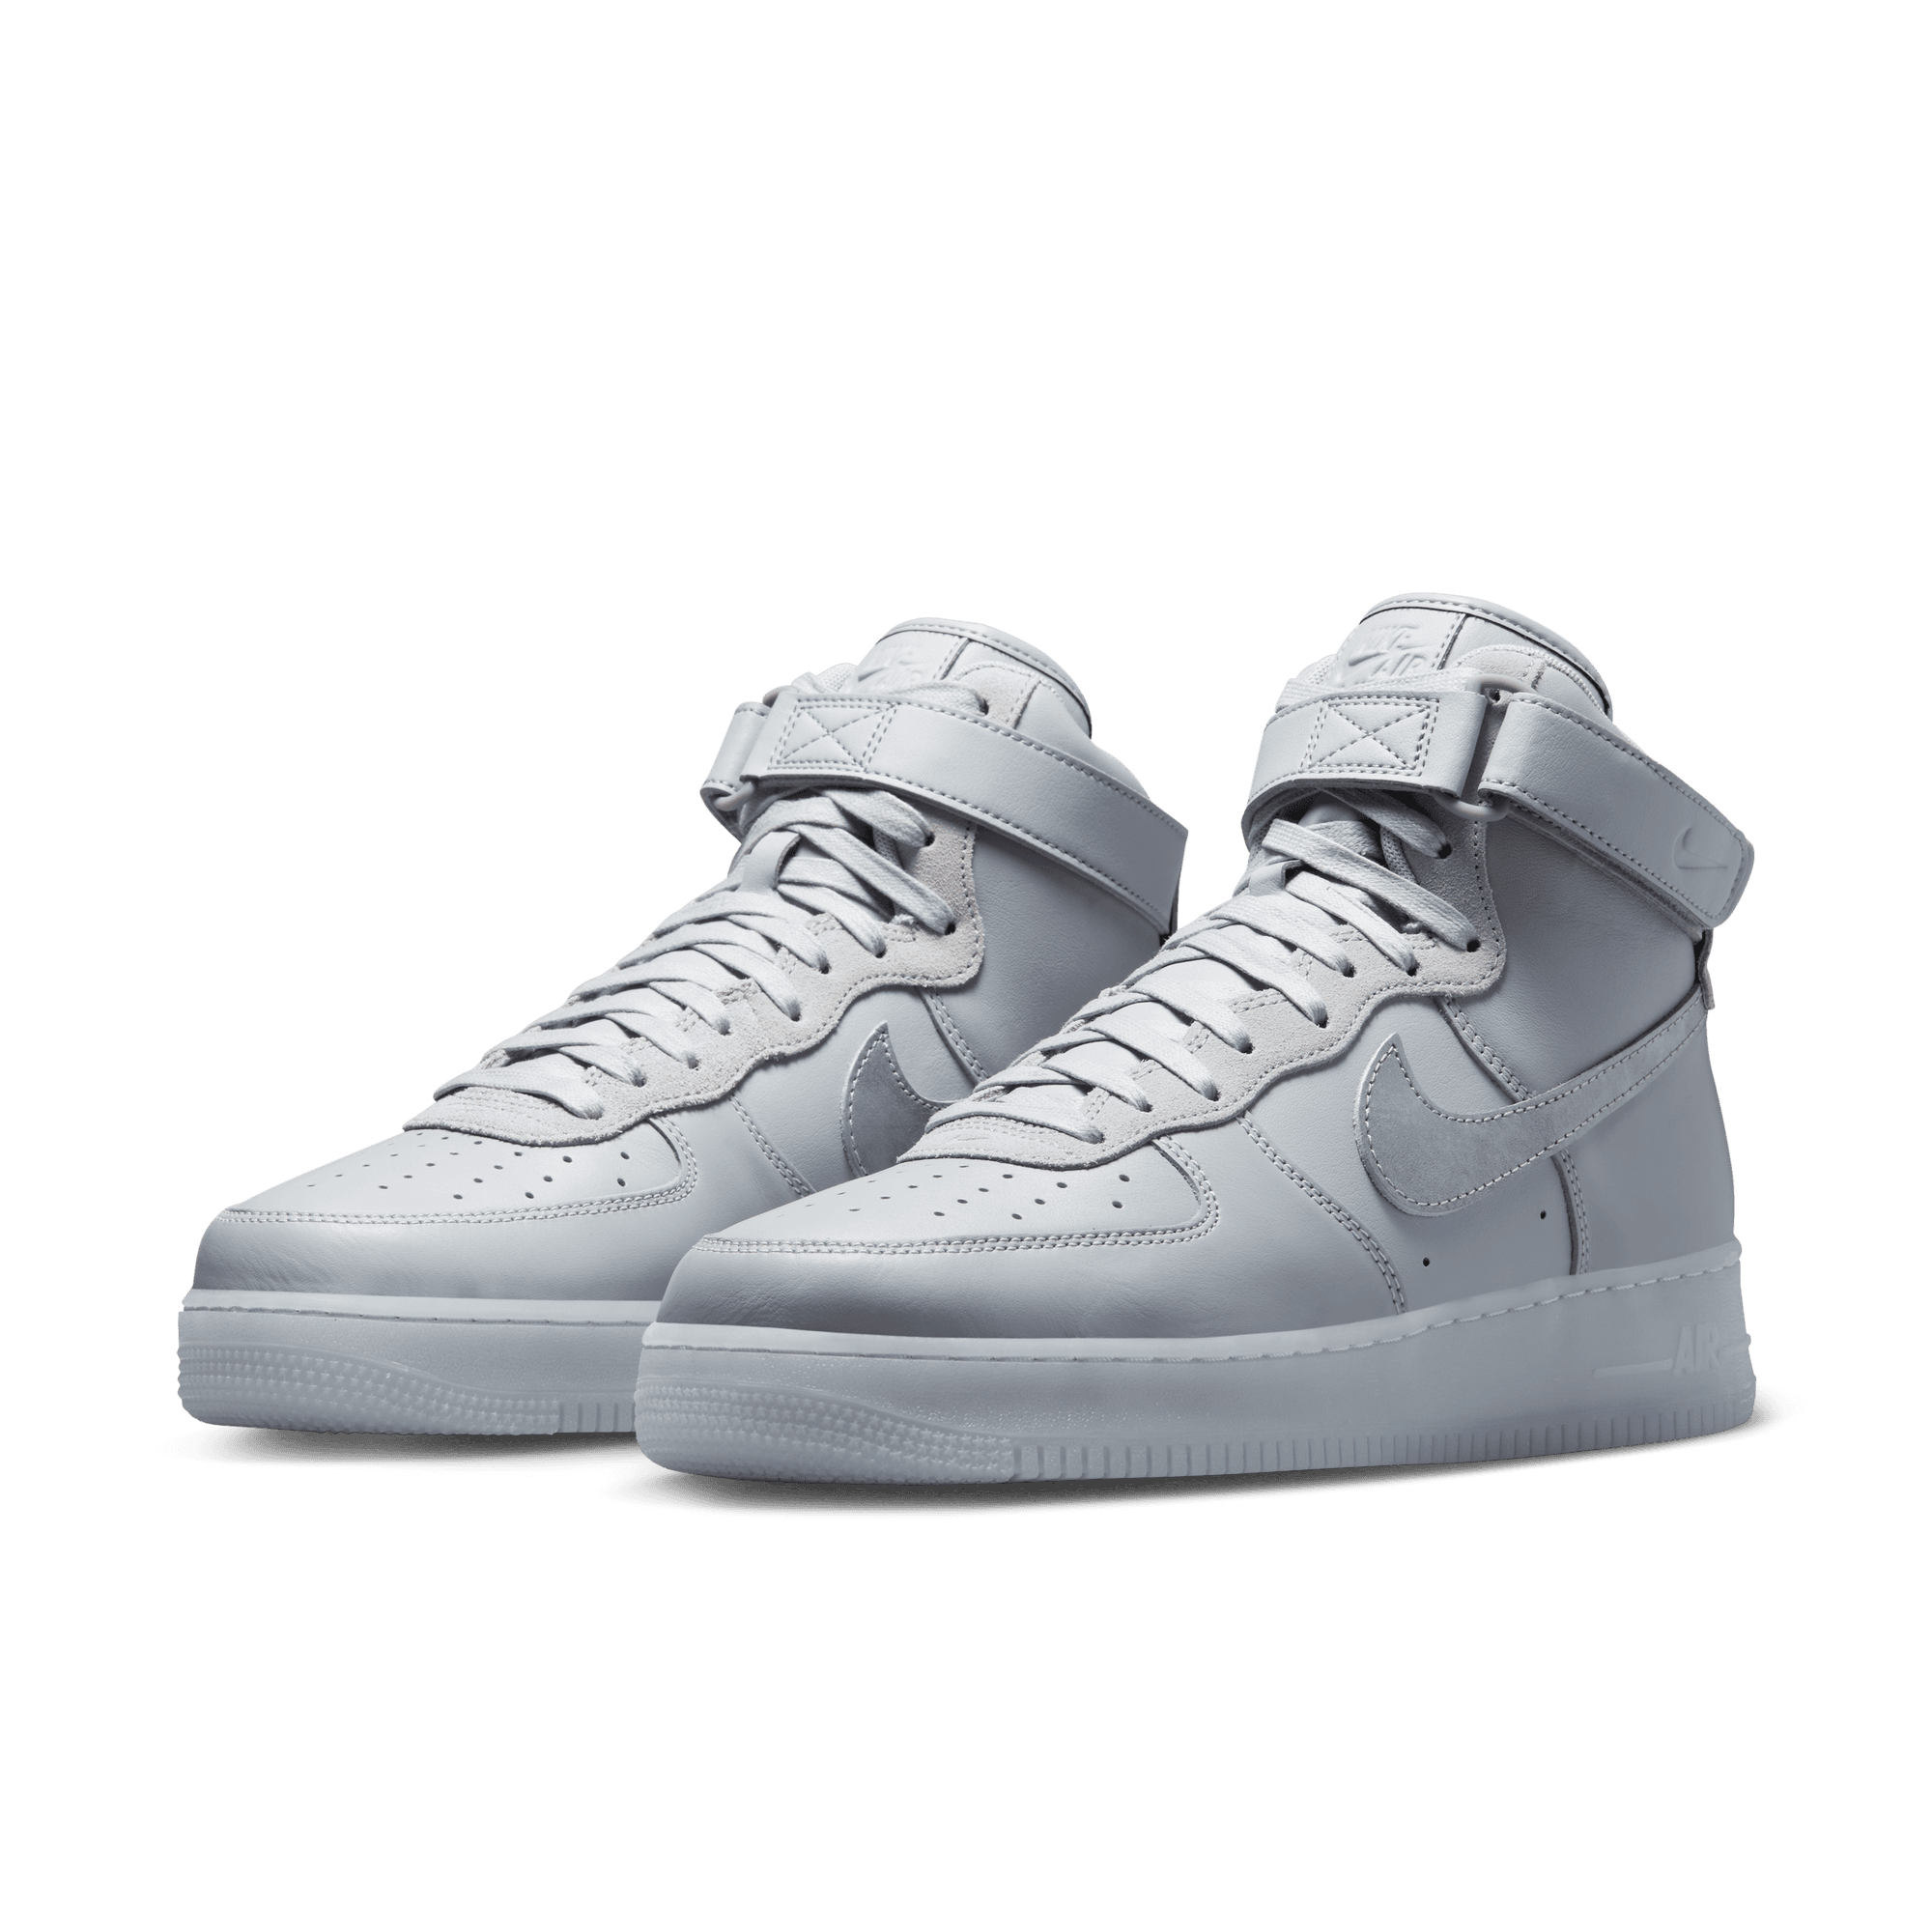 Nike Air Force 1 07 Mid LV8 Men's Shoe Size 8.5 (Wolf Grey)